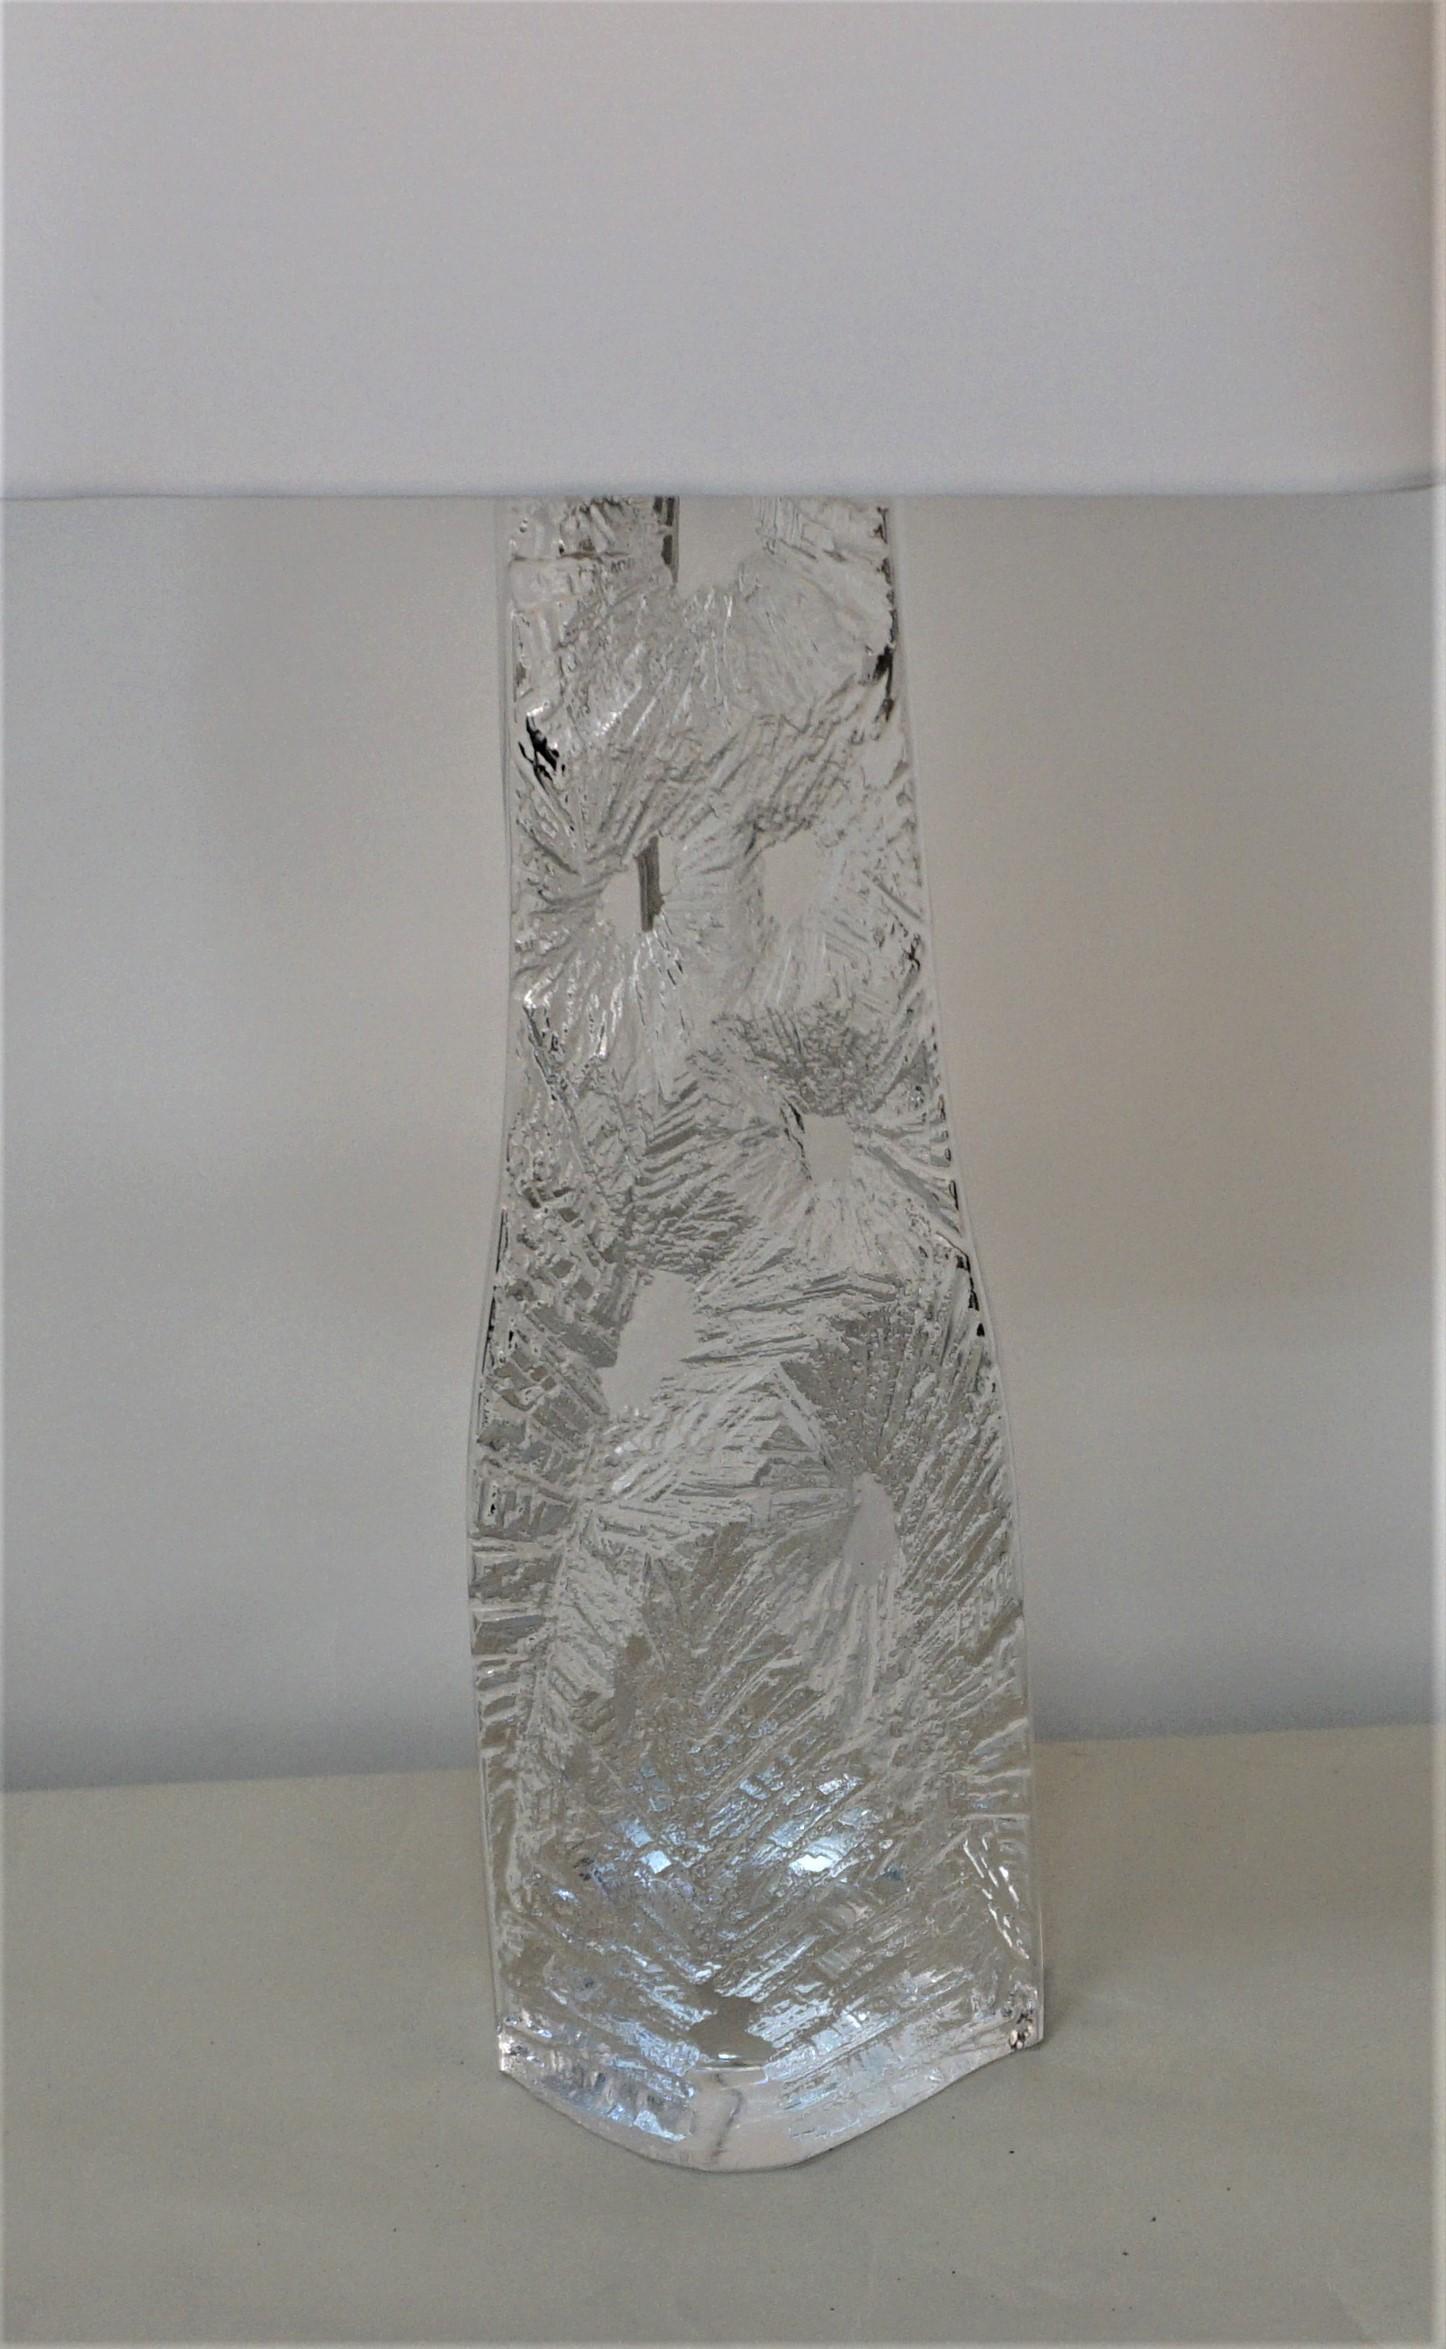 Tall heavy abstract design crystal table lamp by Daum, texture in front and clear and smooth in the back.
Glass base by itself is 15.5